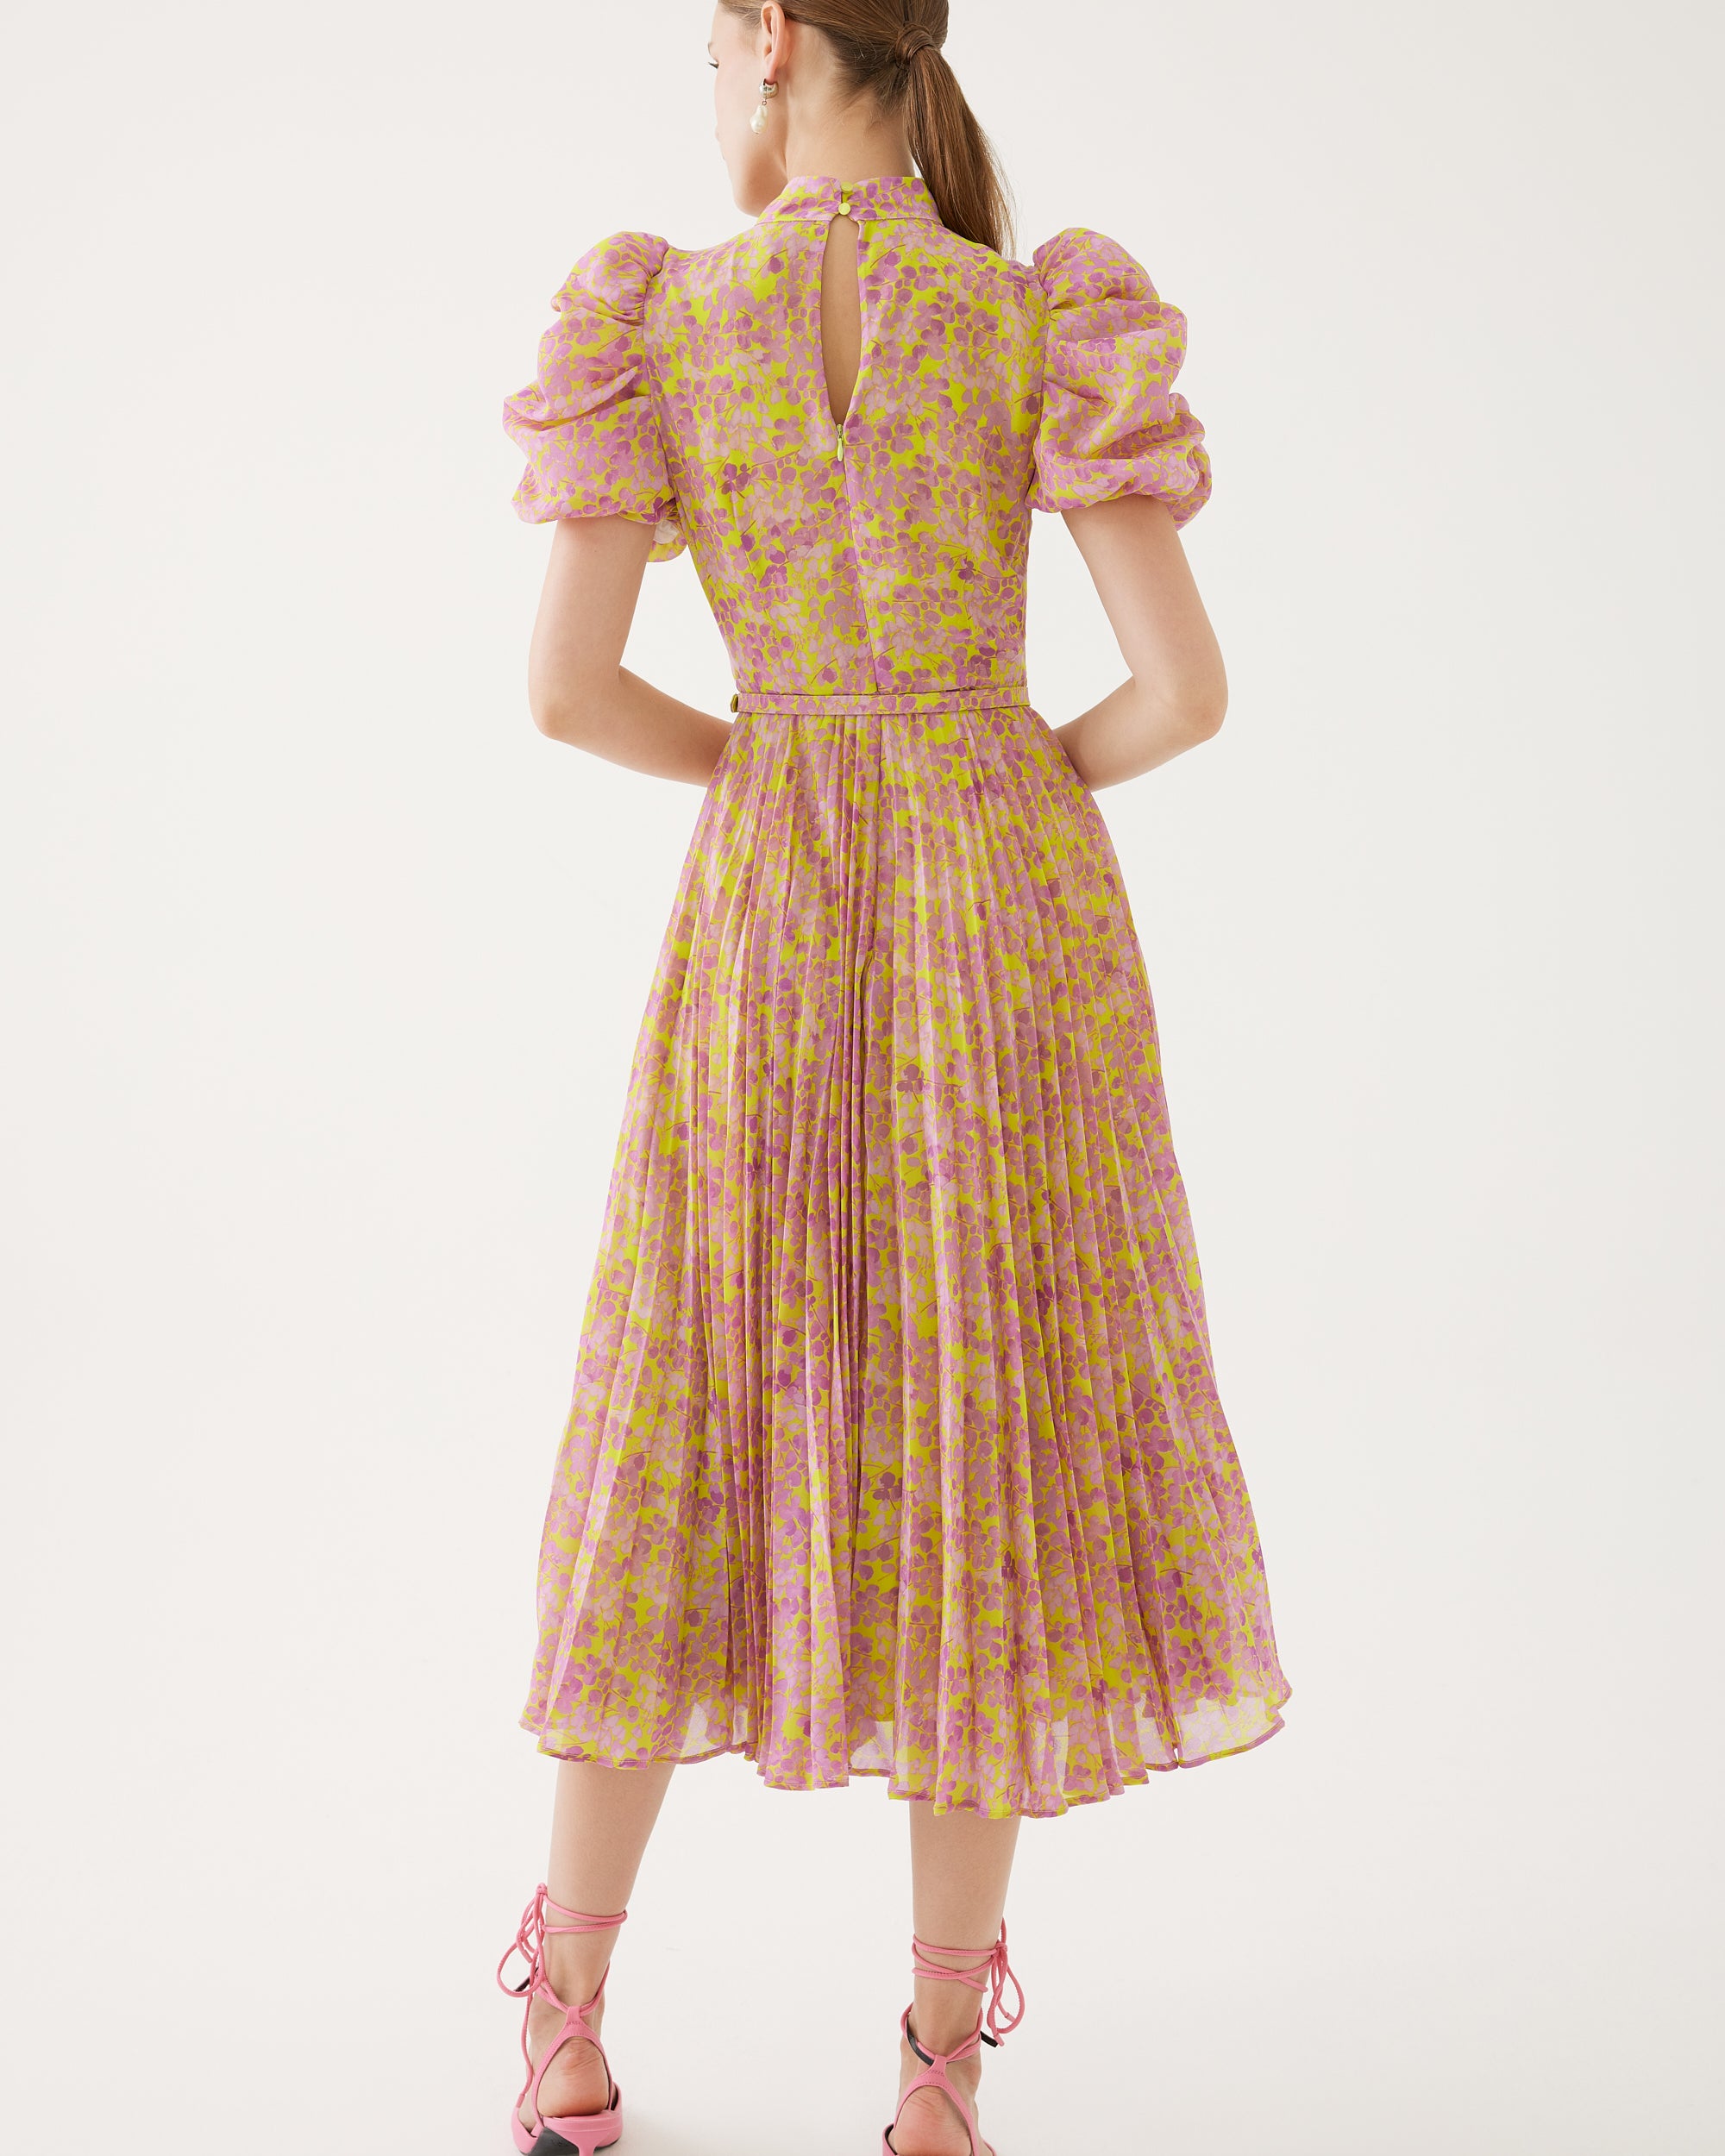  FExquise Pink/yellow Blossom Print Pleated Midi Dressrom The Back